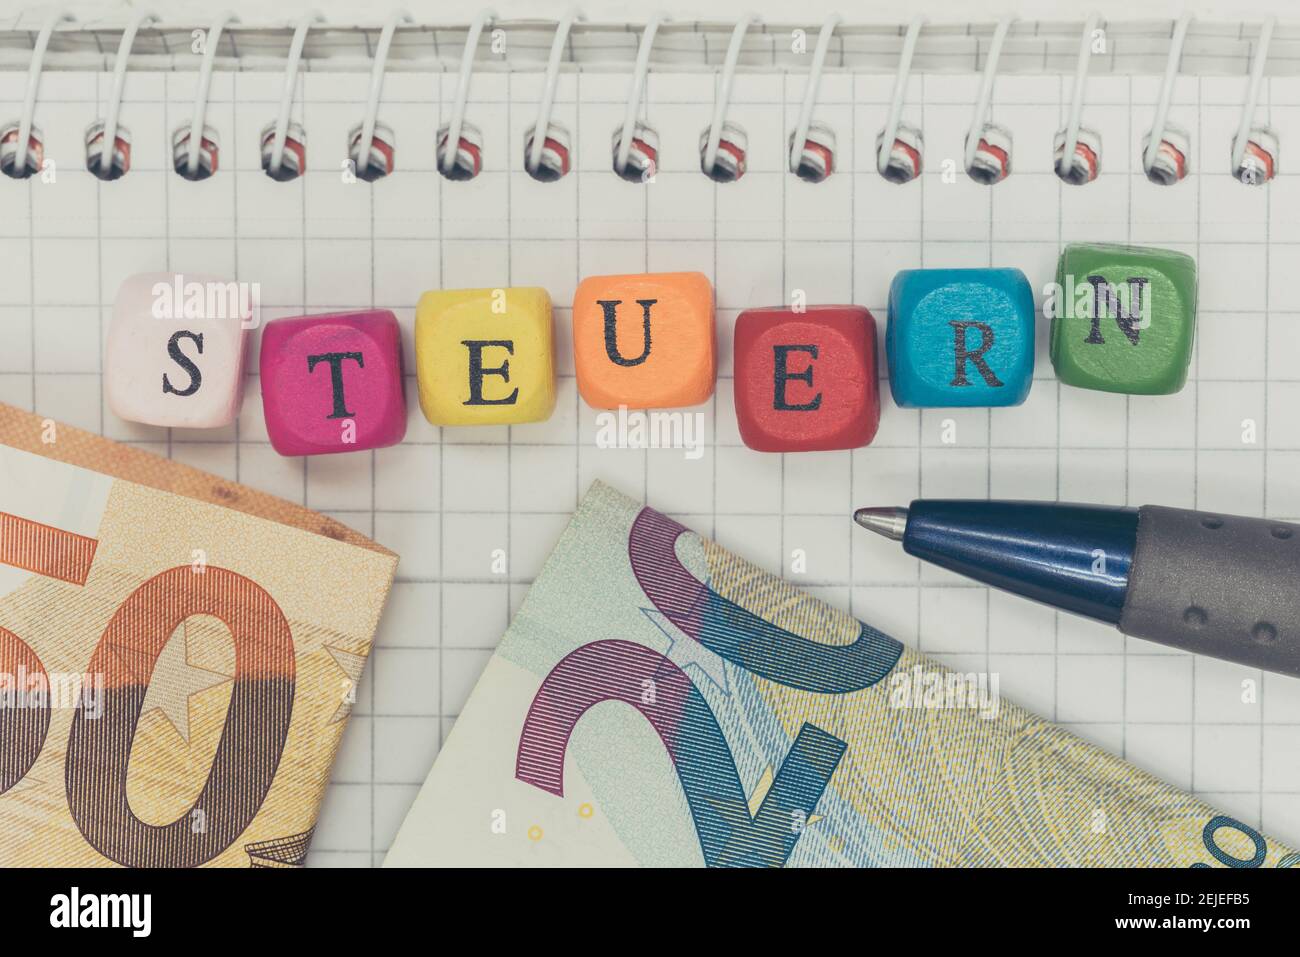 Steuern (in german Tax) concept with letter cubes and bank notes. Stock Photo